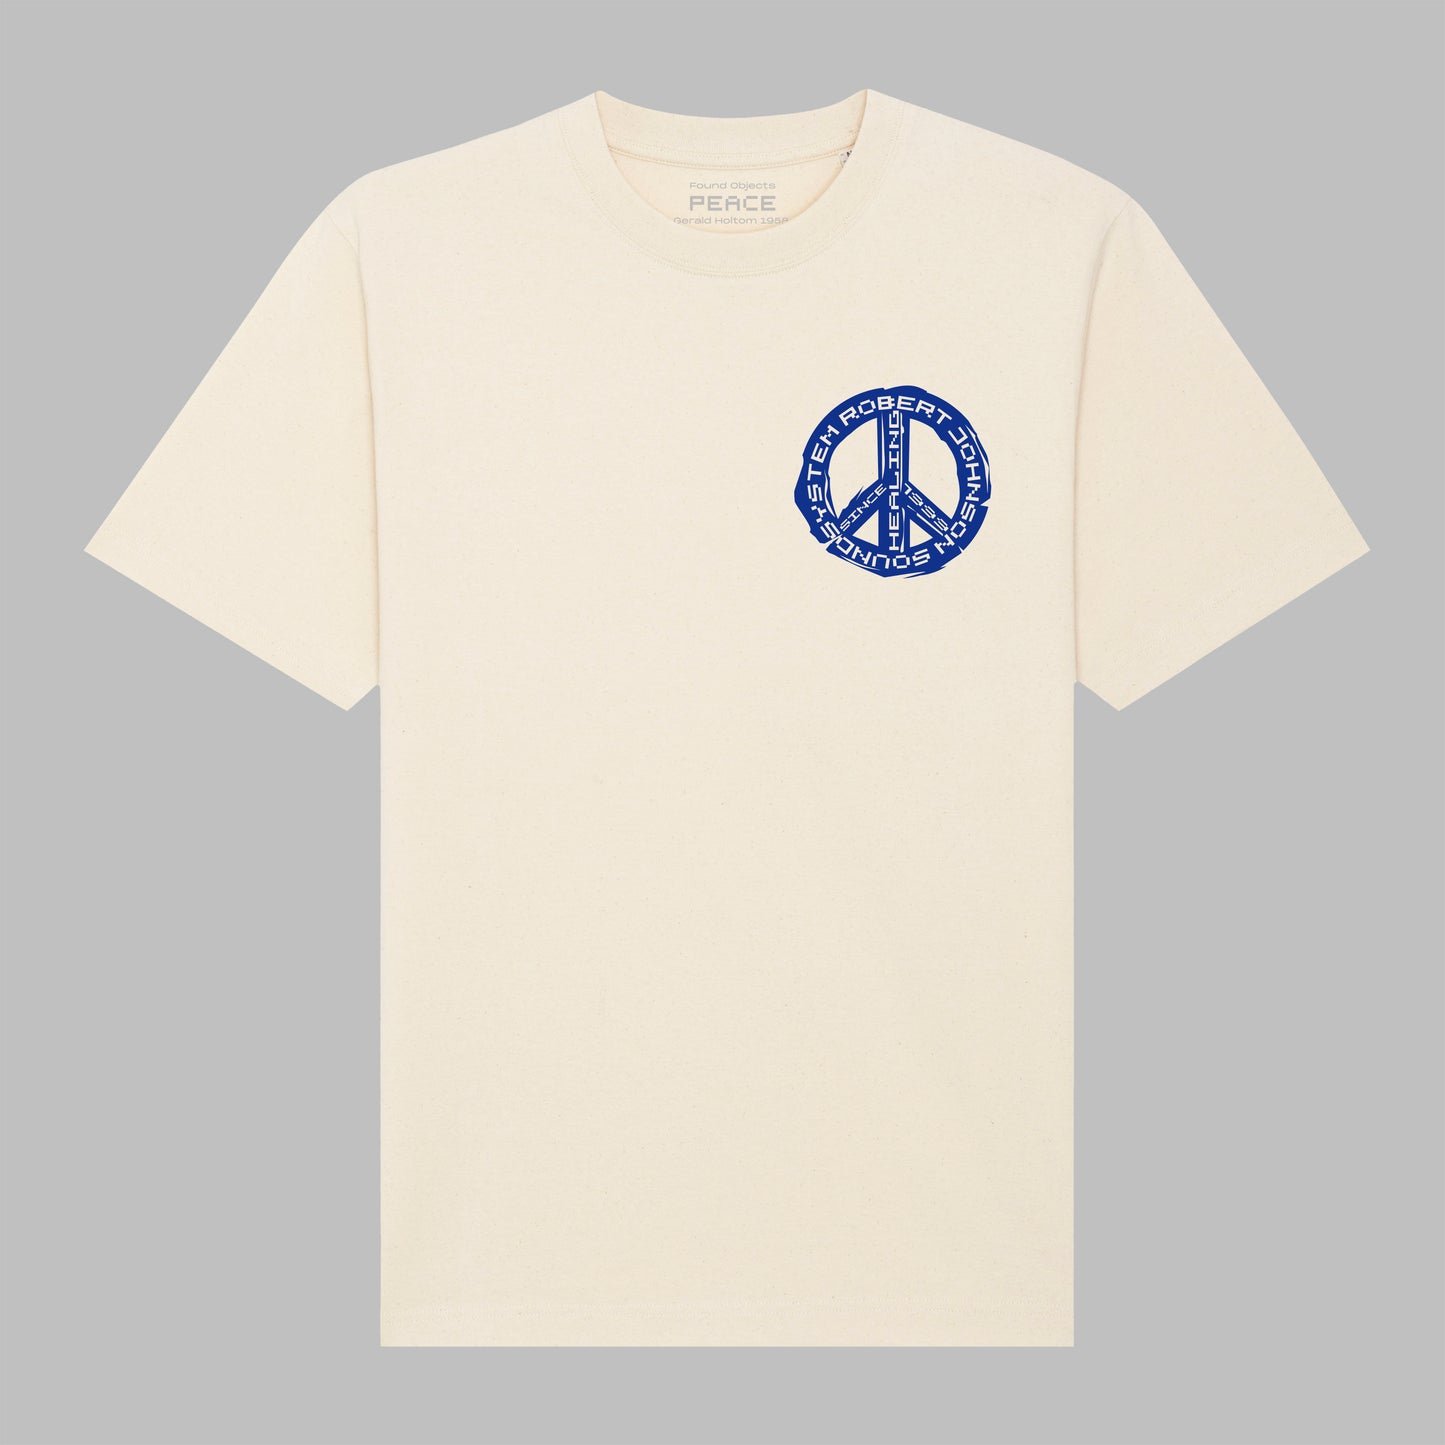 "Found Objects: Peace by Gerald Holtom!" - Shirt - Natural Raw